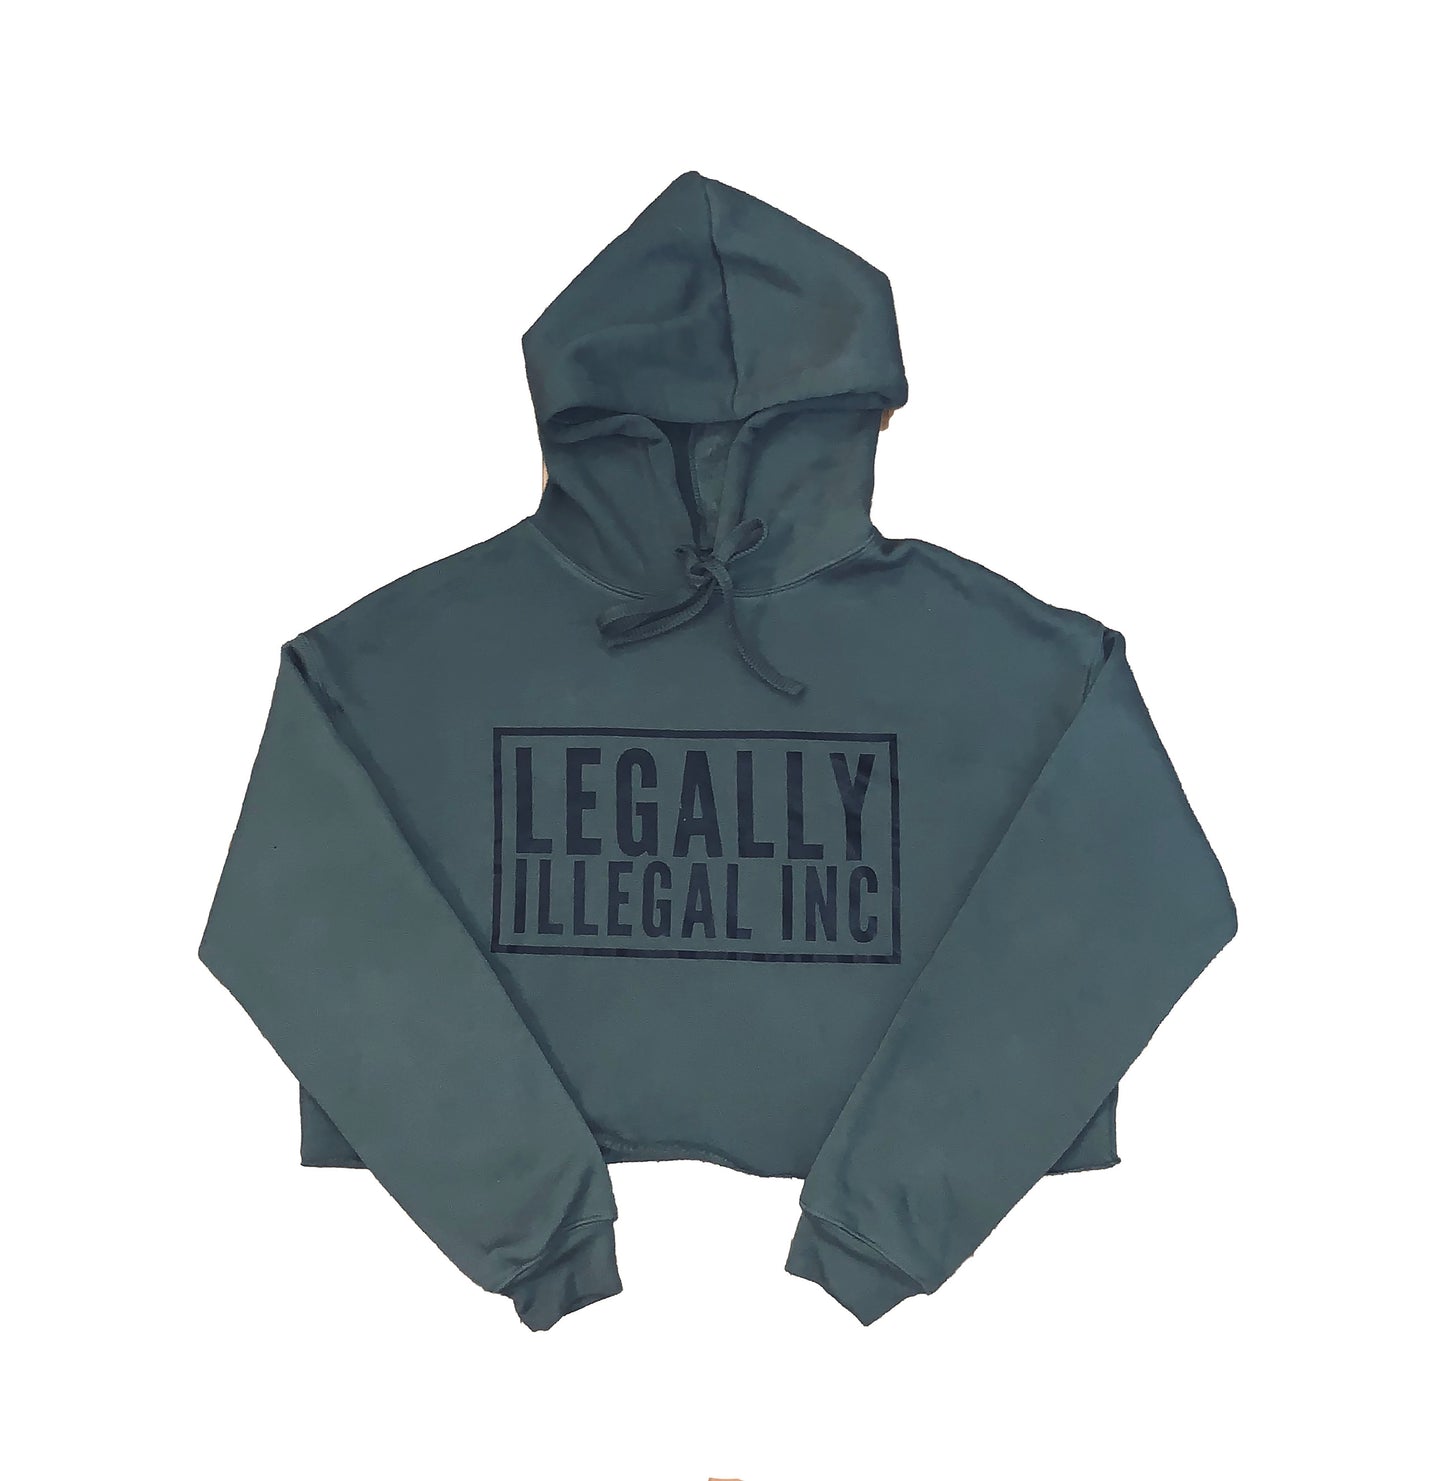 Classic Legally Illegal Crop Hoodie